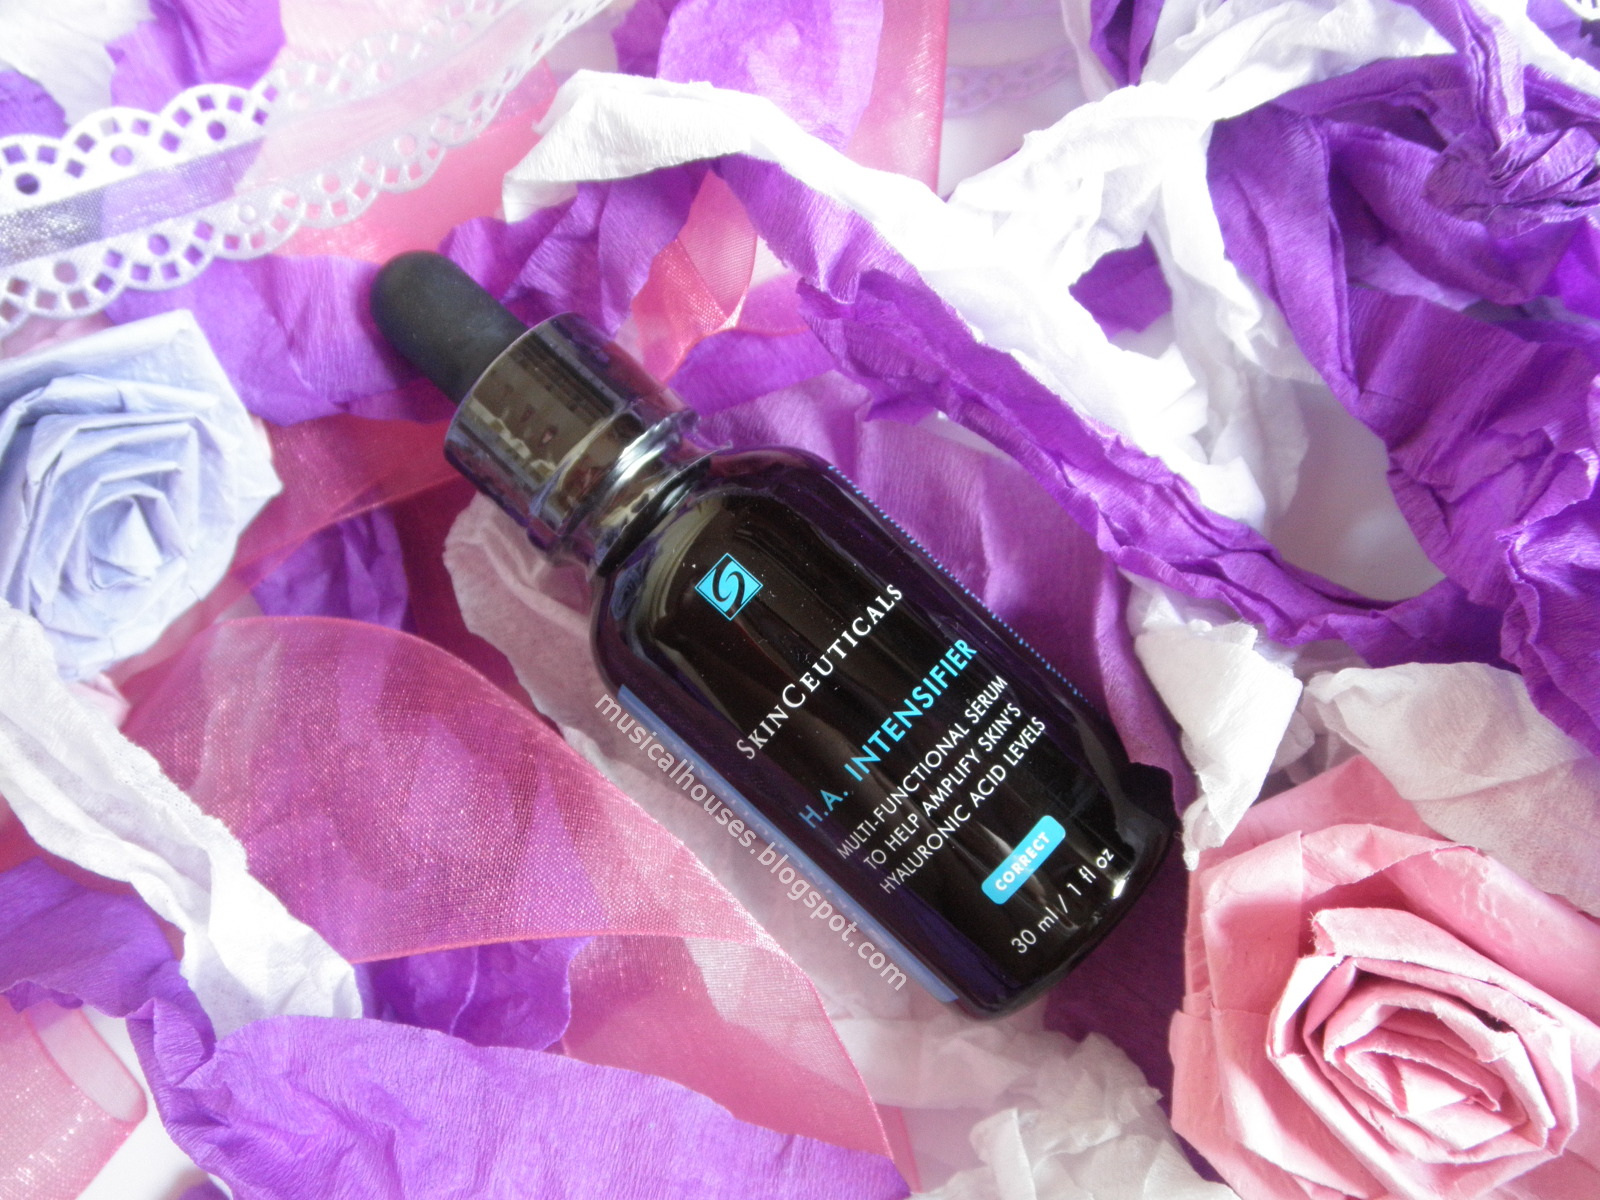 Skinceuticals H A Hyaluronic Acid Intensifier Review And Ingredients Analysis Of Faces And Fingers